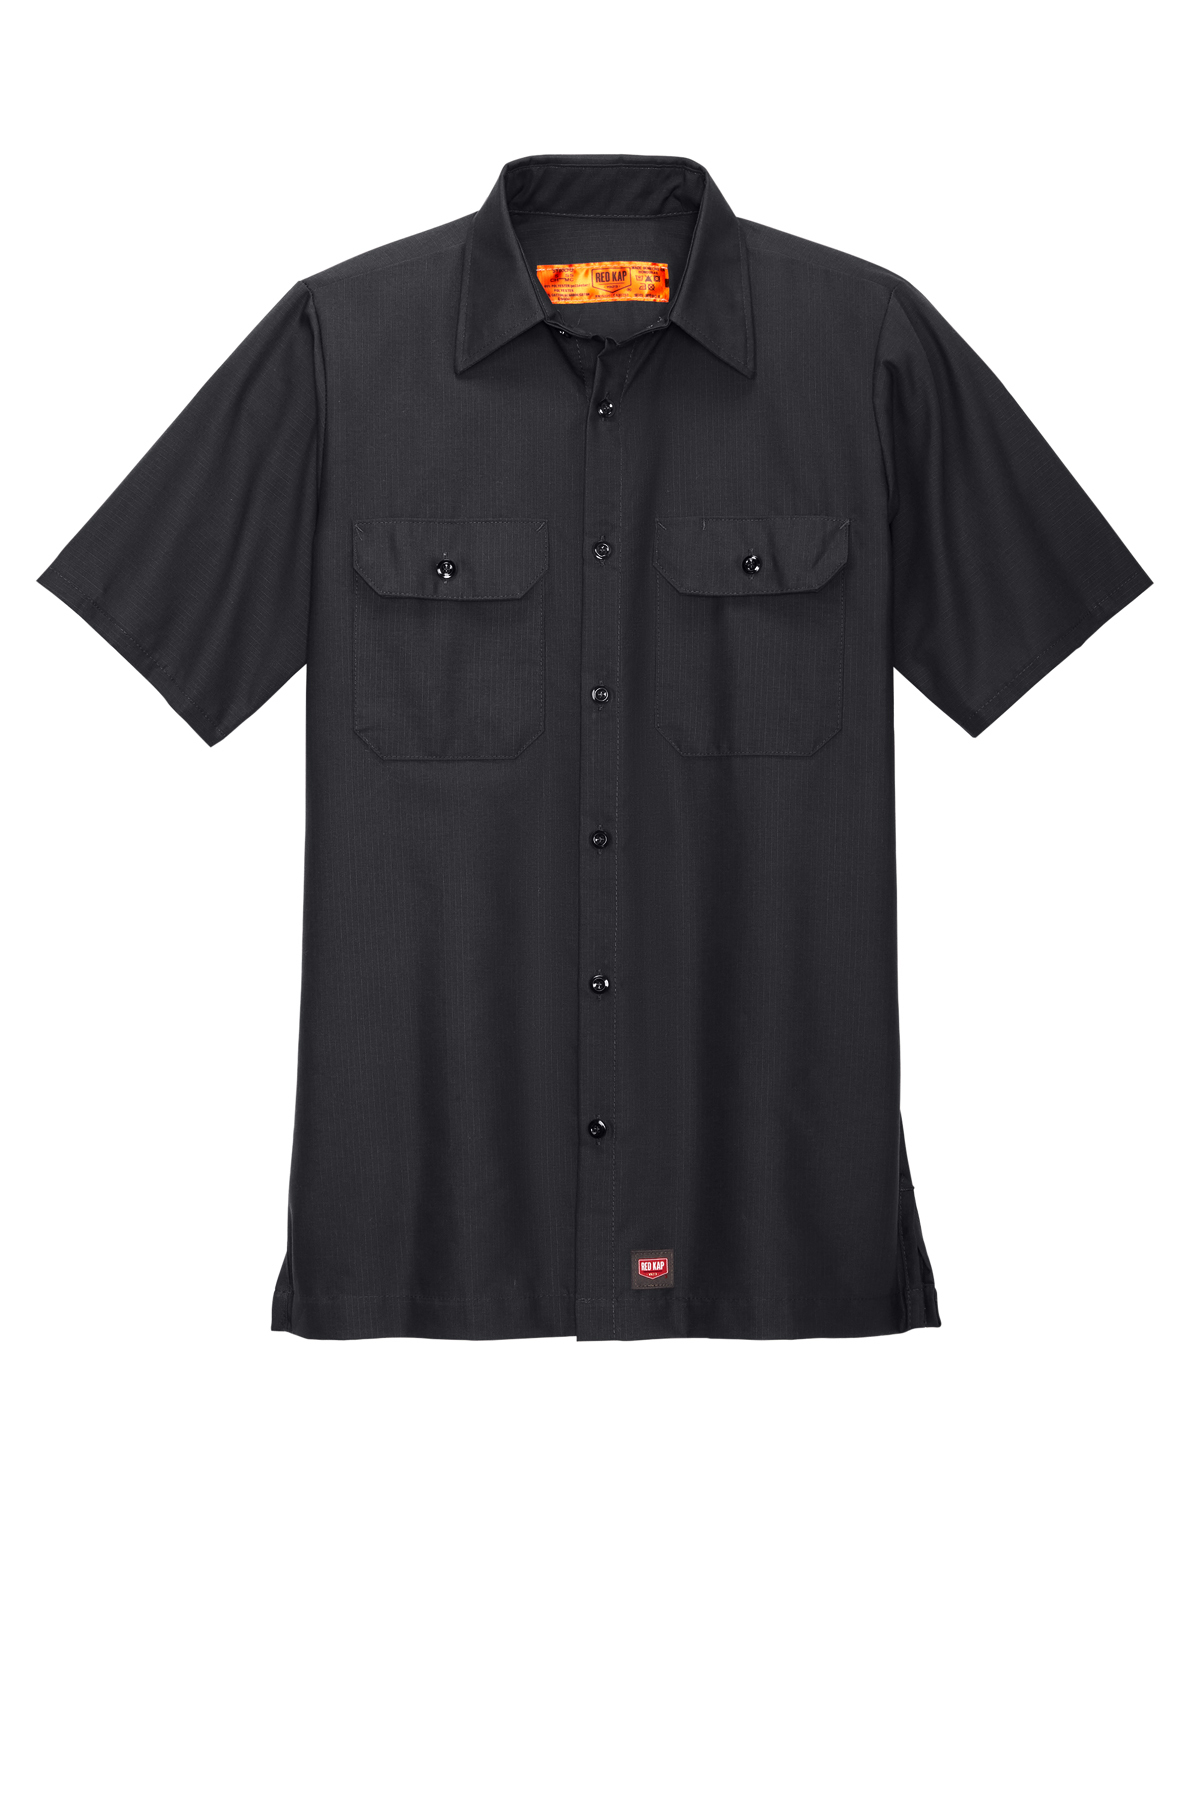 Red Kap ® Short Sleeve Solid Ripstop Shirt | Product | Company Casuals